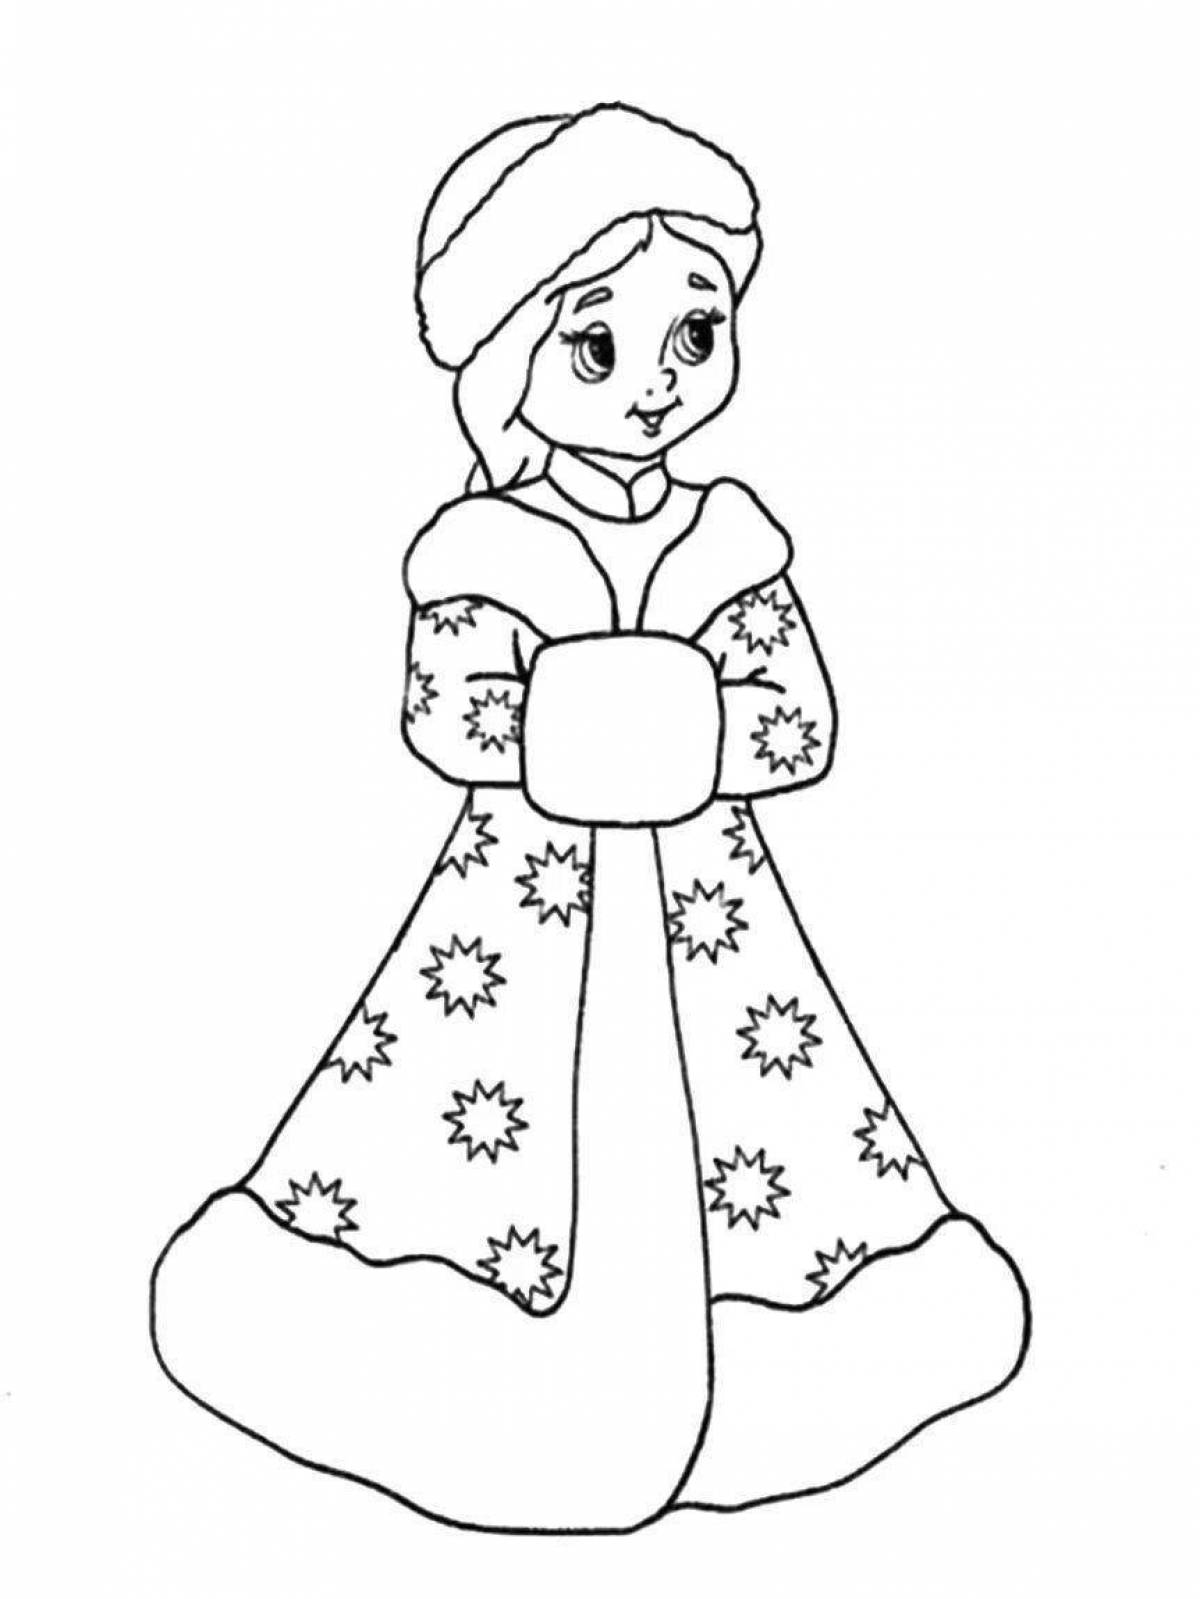 Sublime coloring page snow maiden image